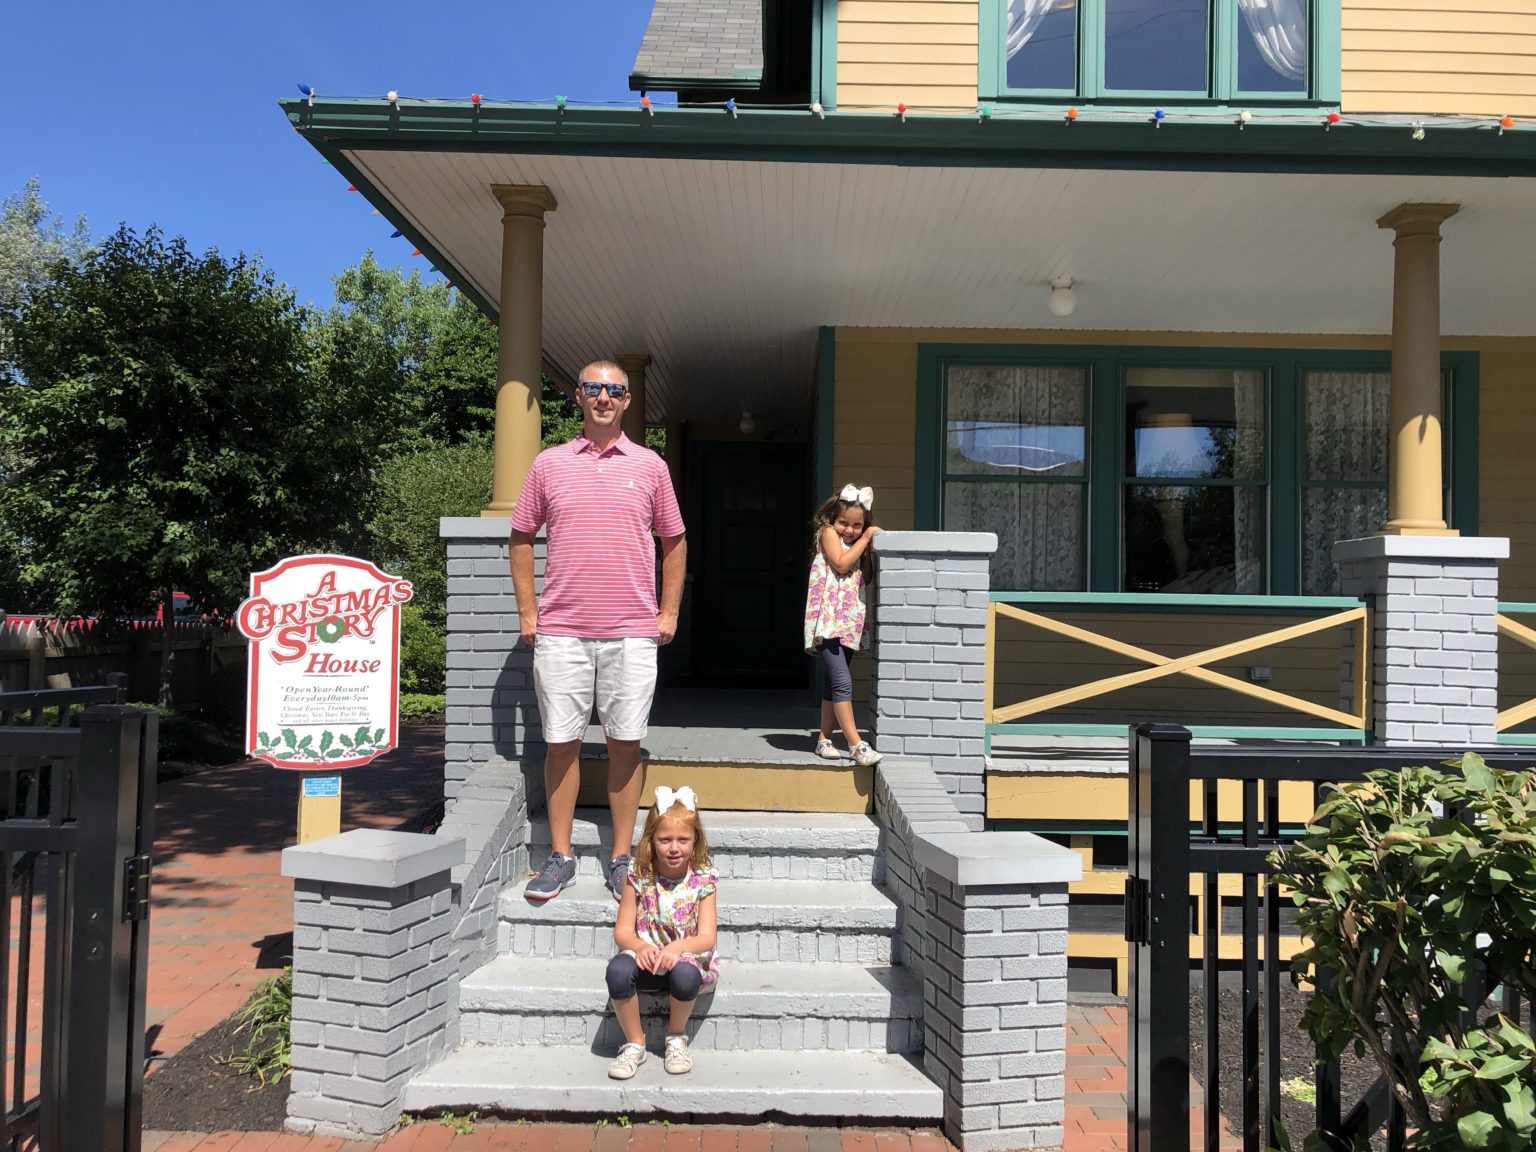 Roadside attractions near me - A Christmas Story house